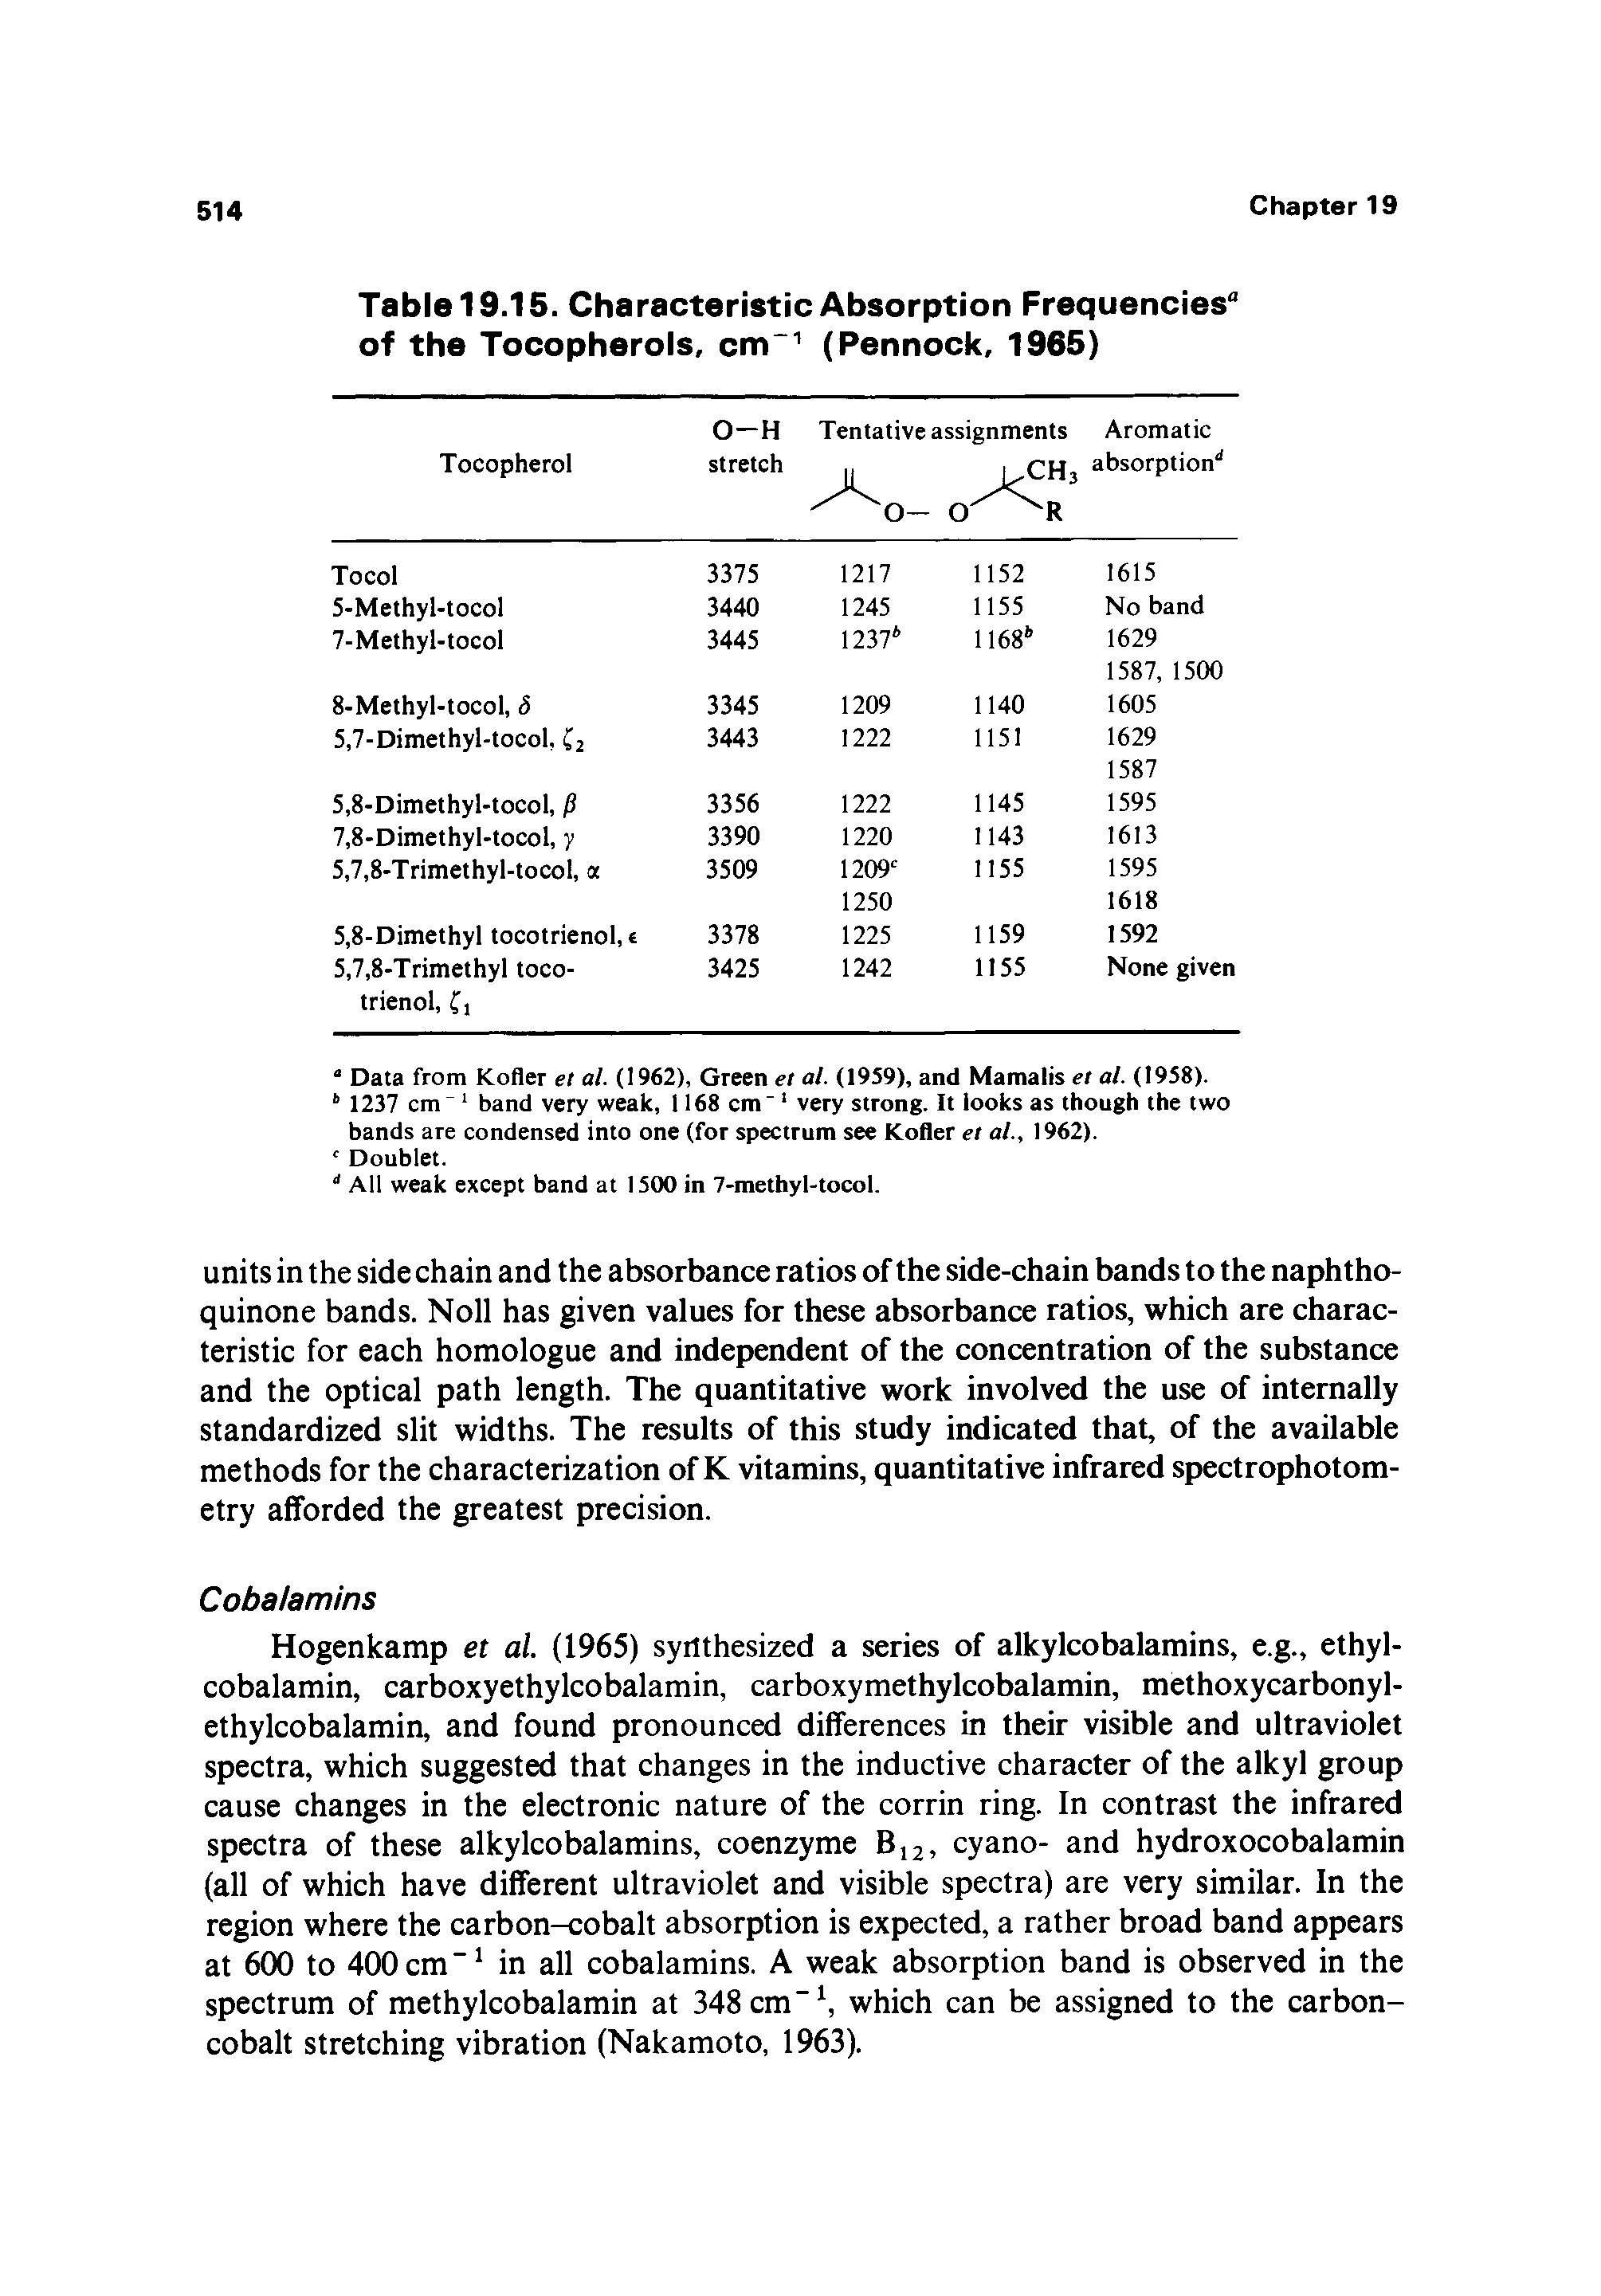 Table 19.15. Characteristic Absorption Frequencies" of the Tocopherols, cm (Pennock, 1965)...